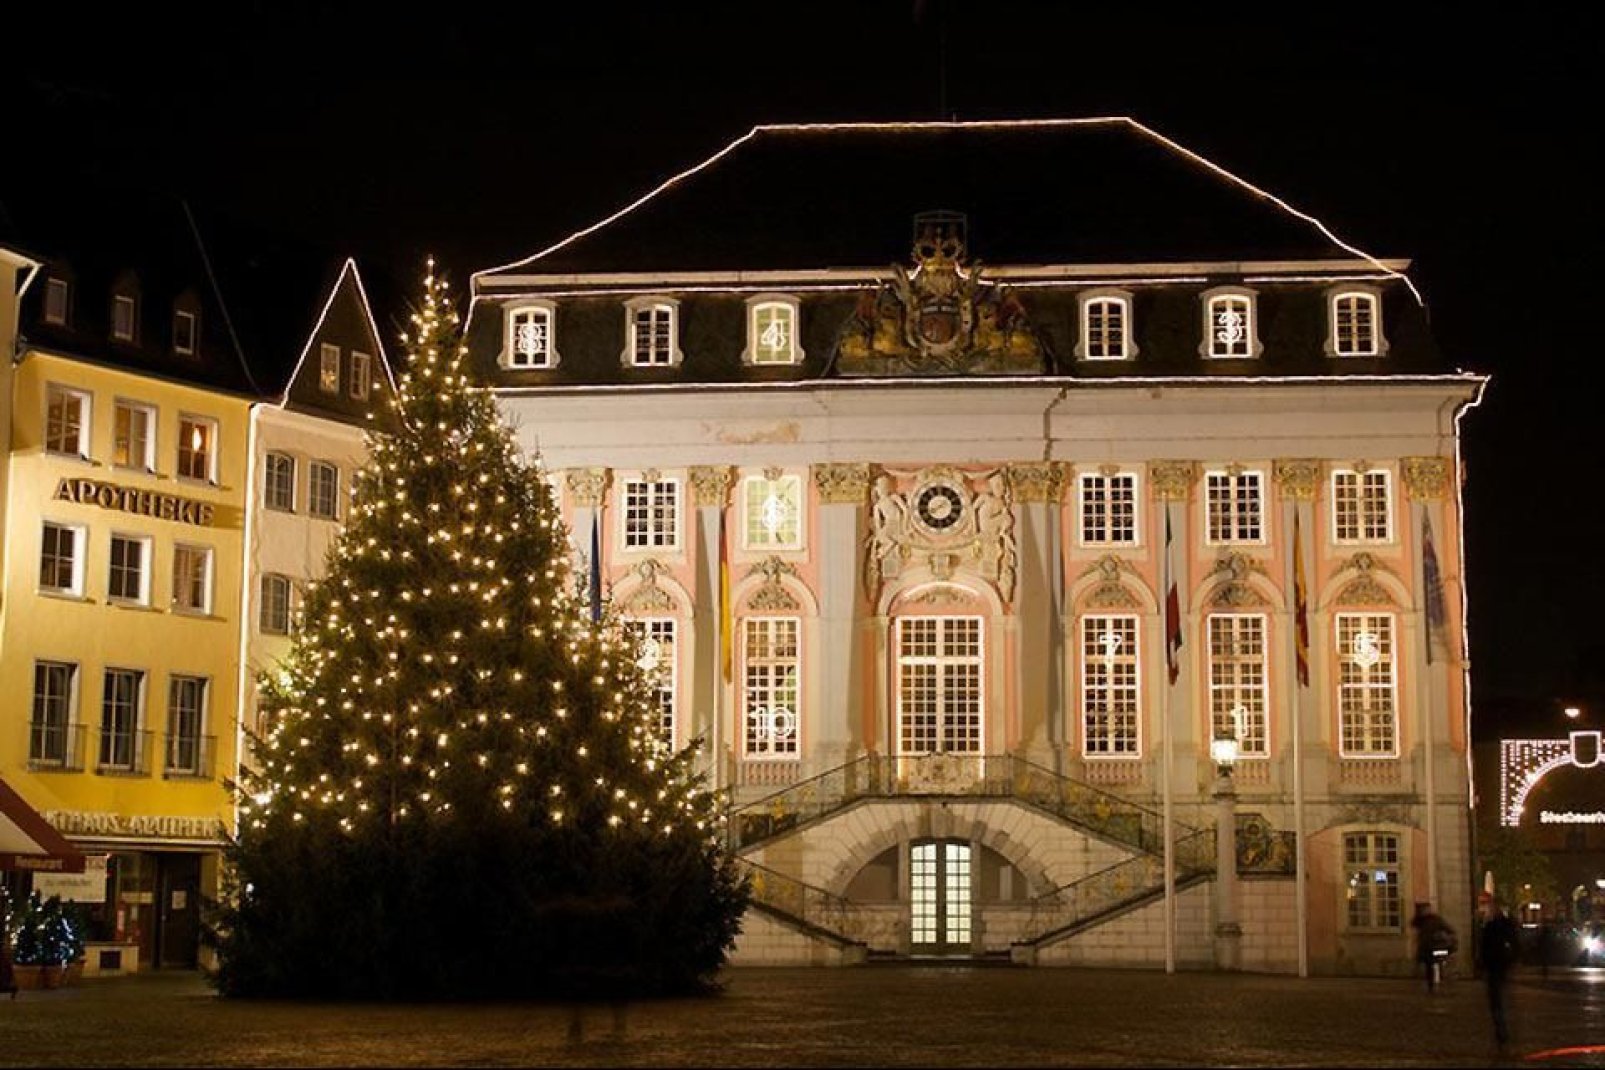 Bonn's city hall is located at the heart of the city.